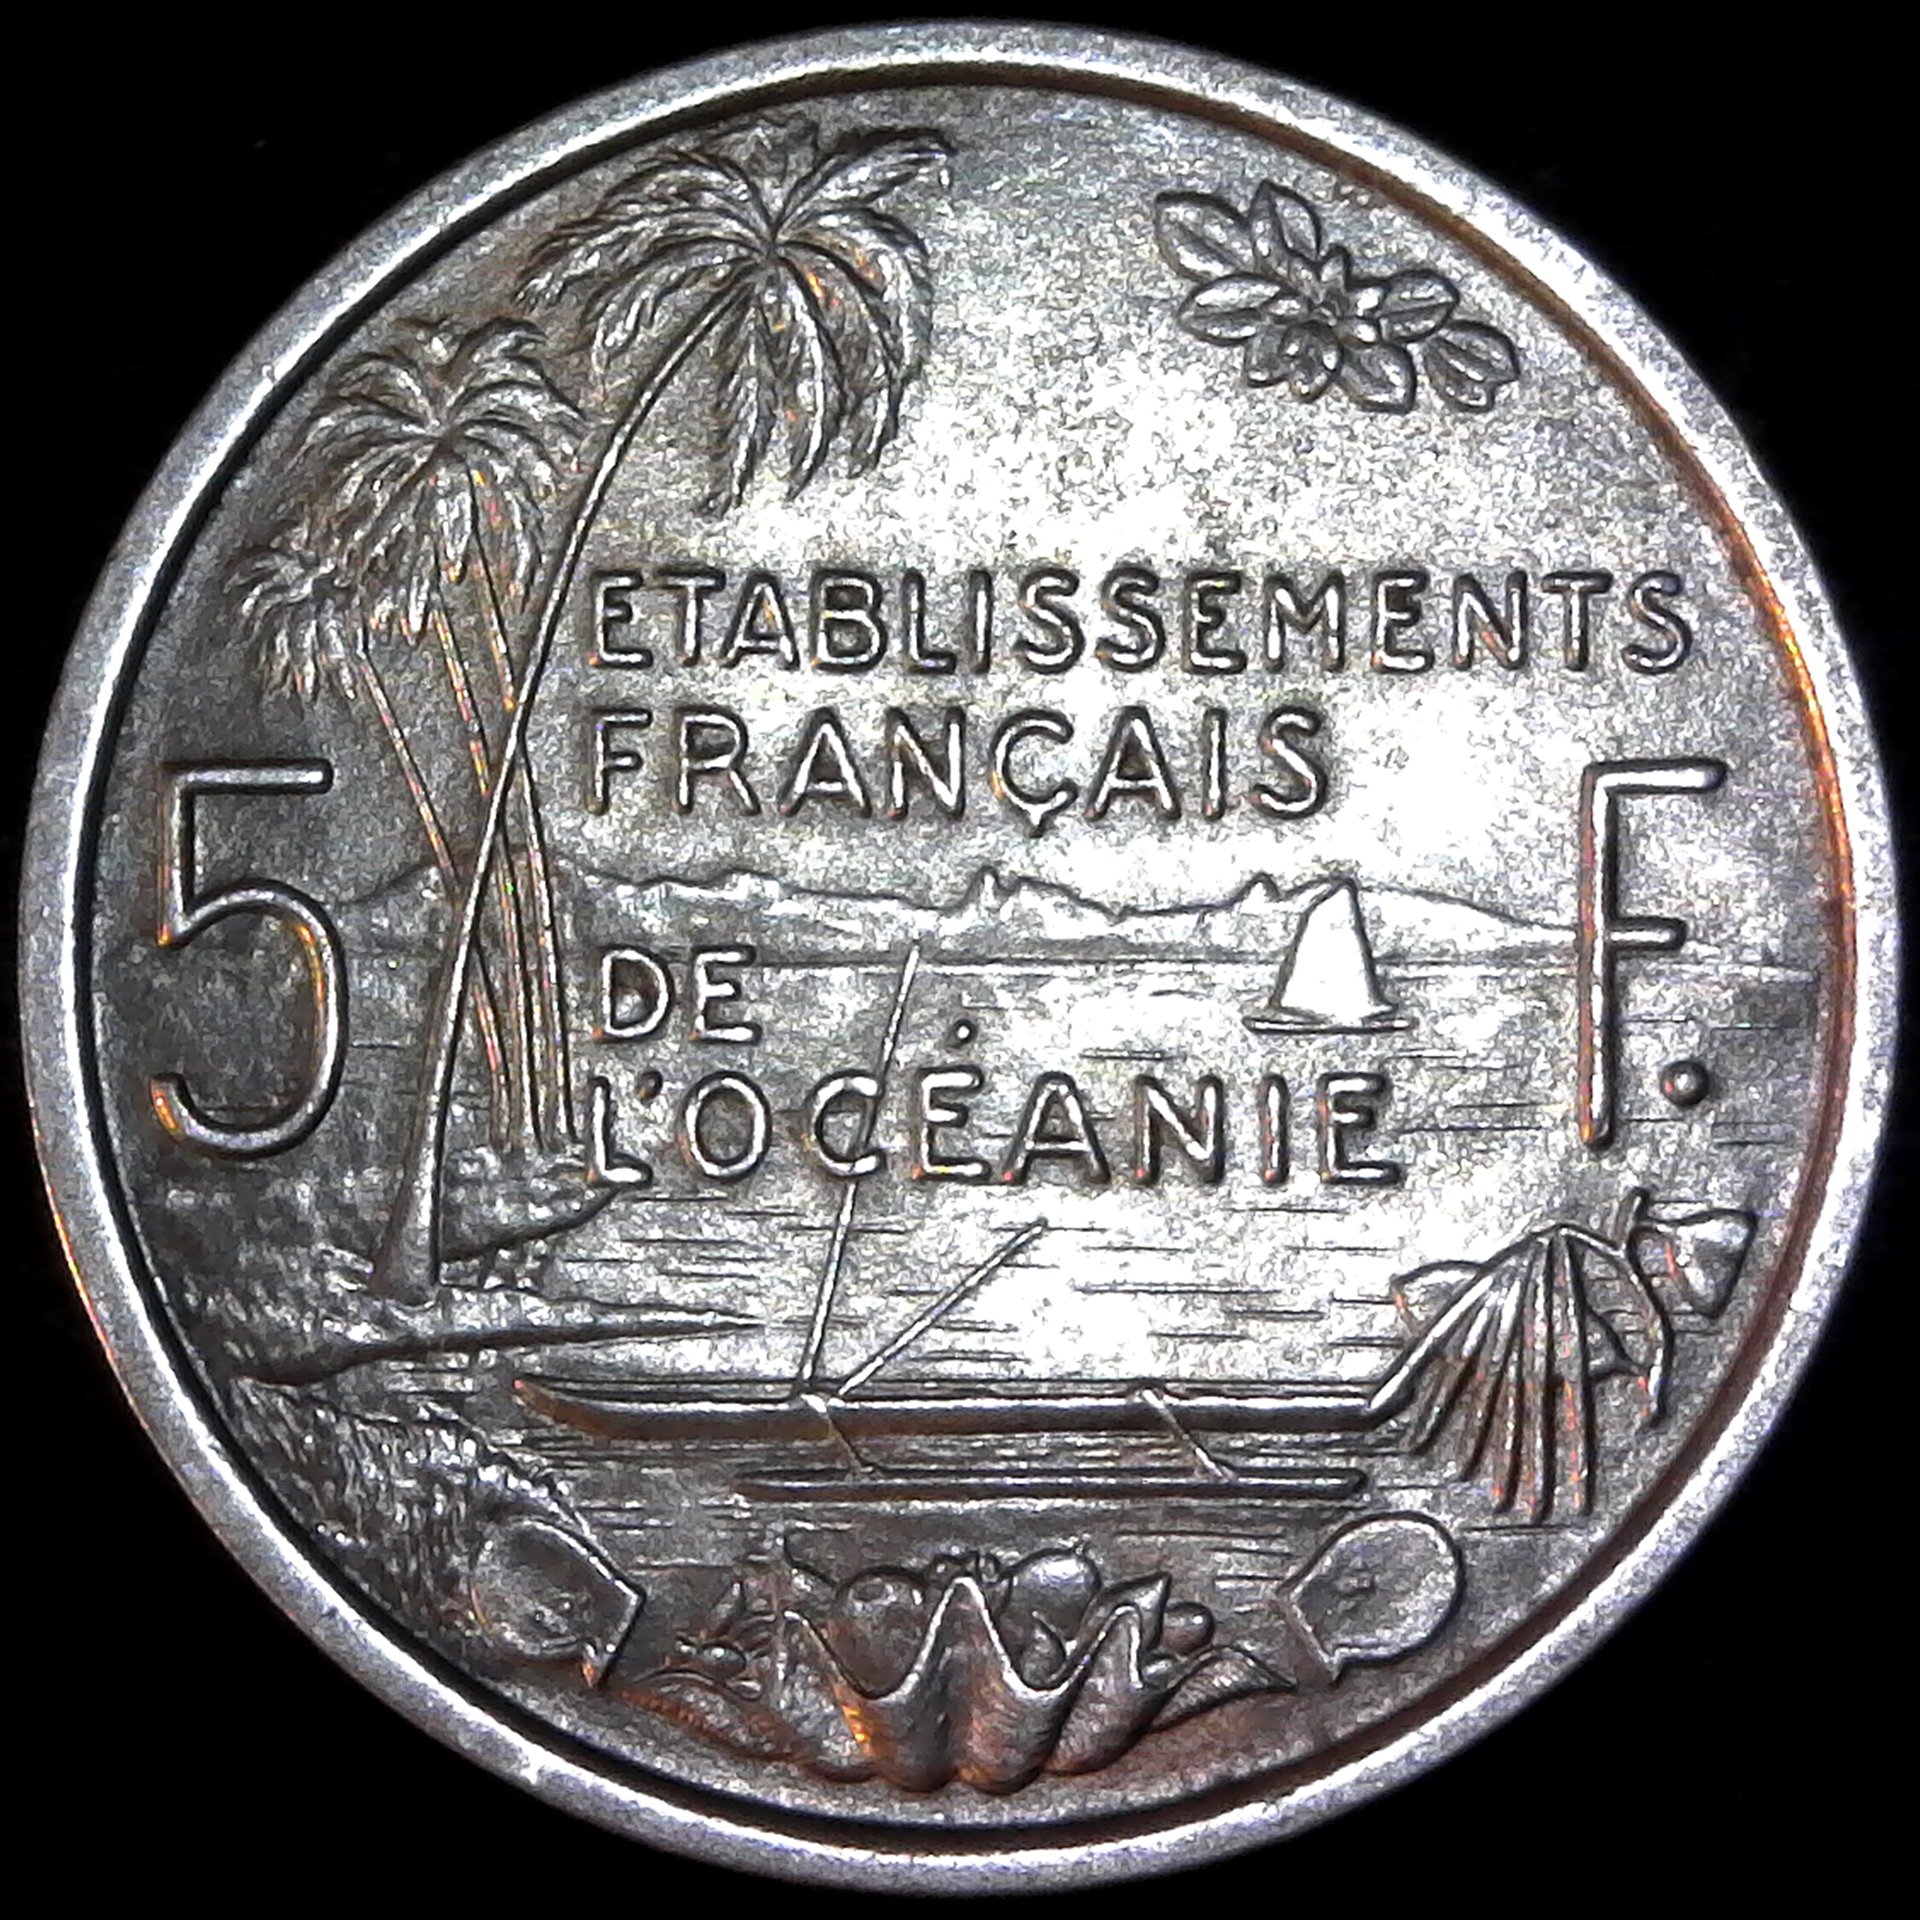 French Oceania 5 Francs 1952 obverse (2).jpg